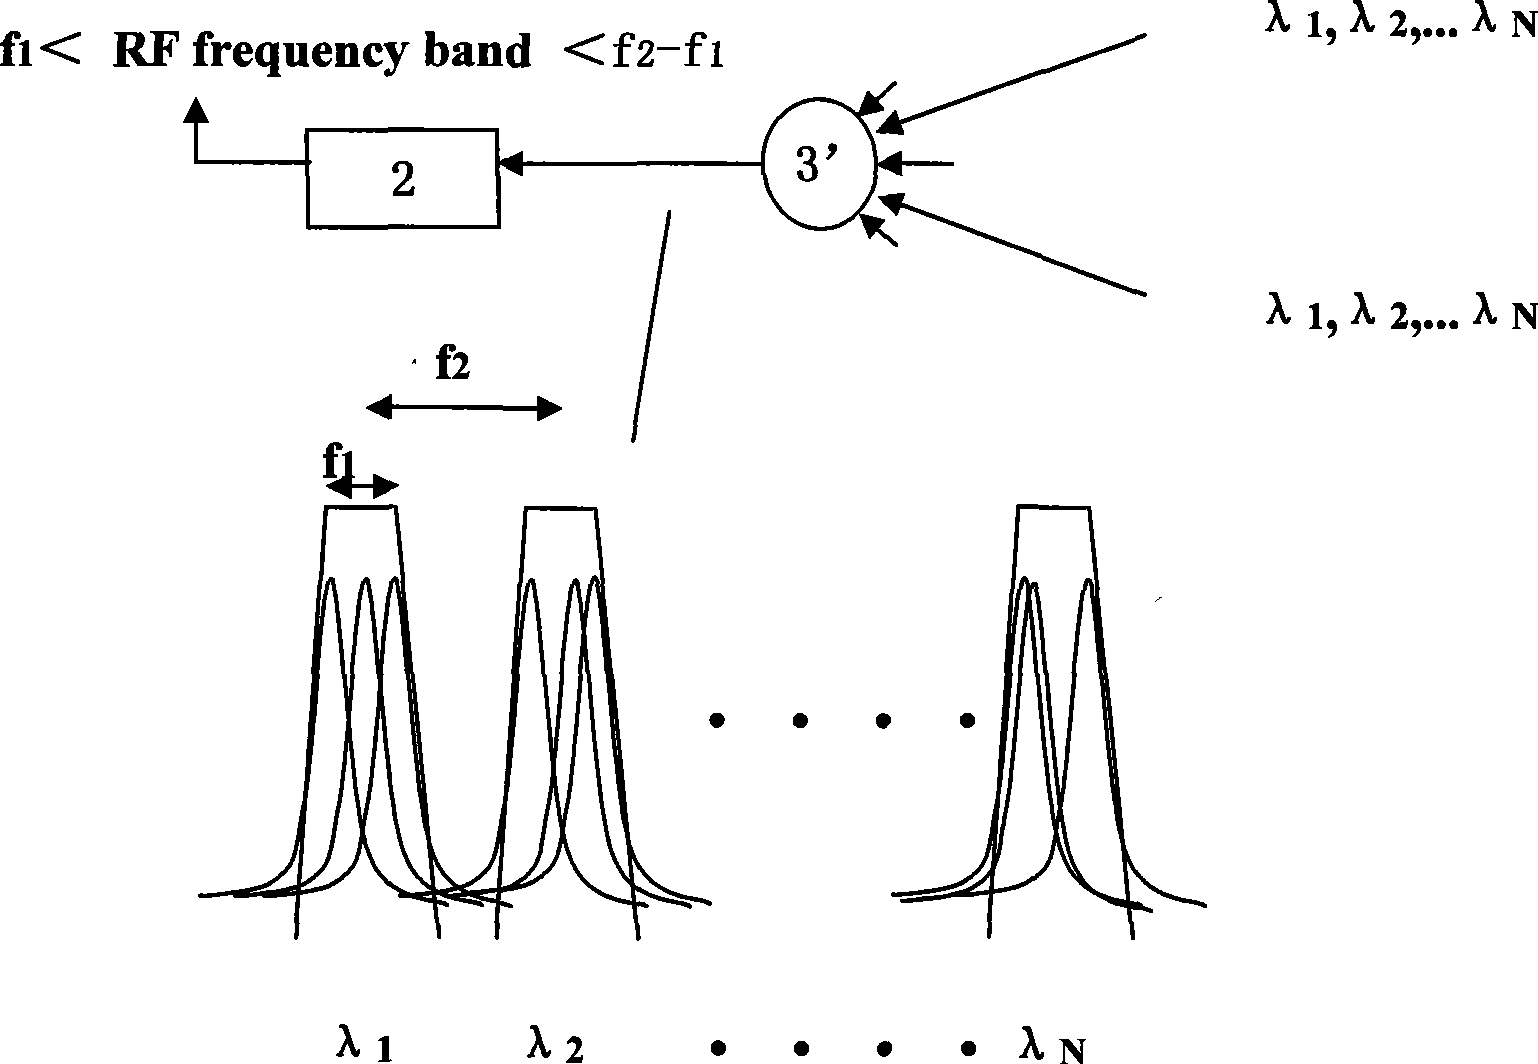 Broadband wireless signal covering network based on passive optical network structure